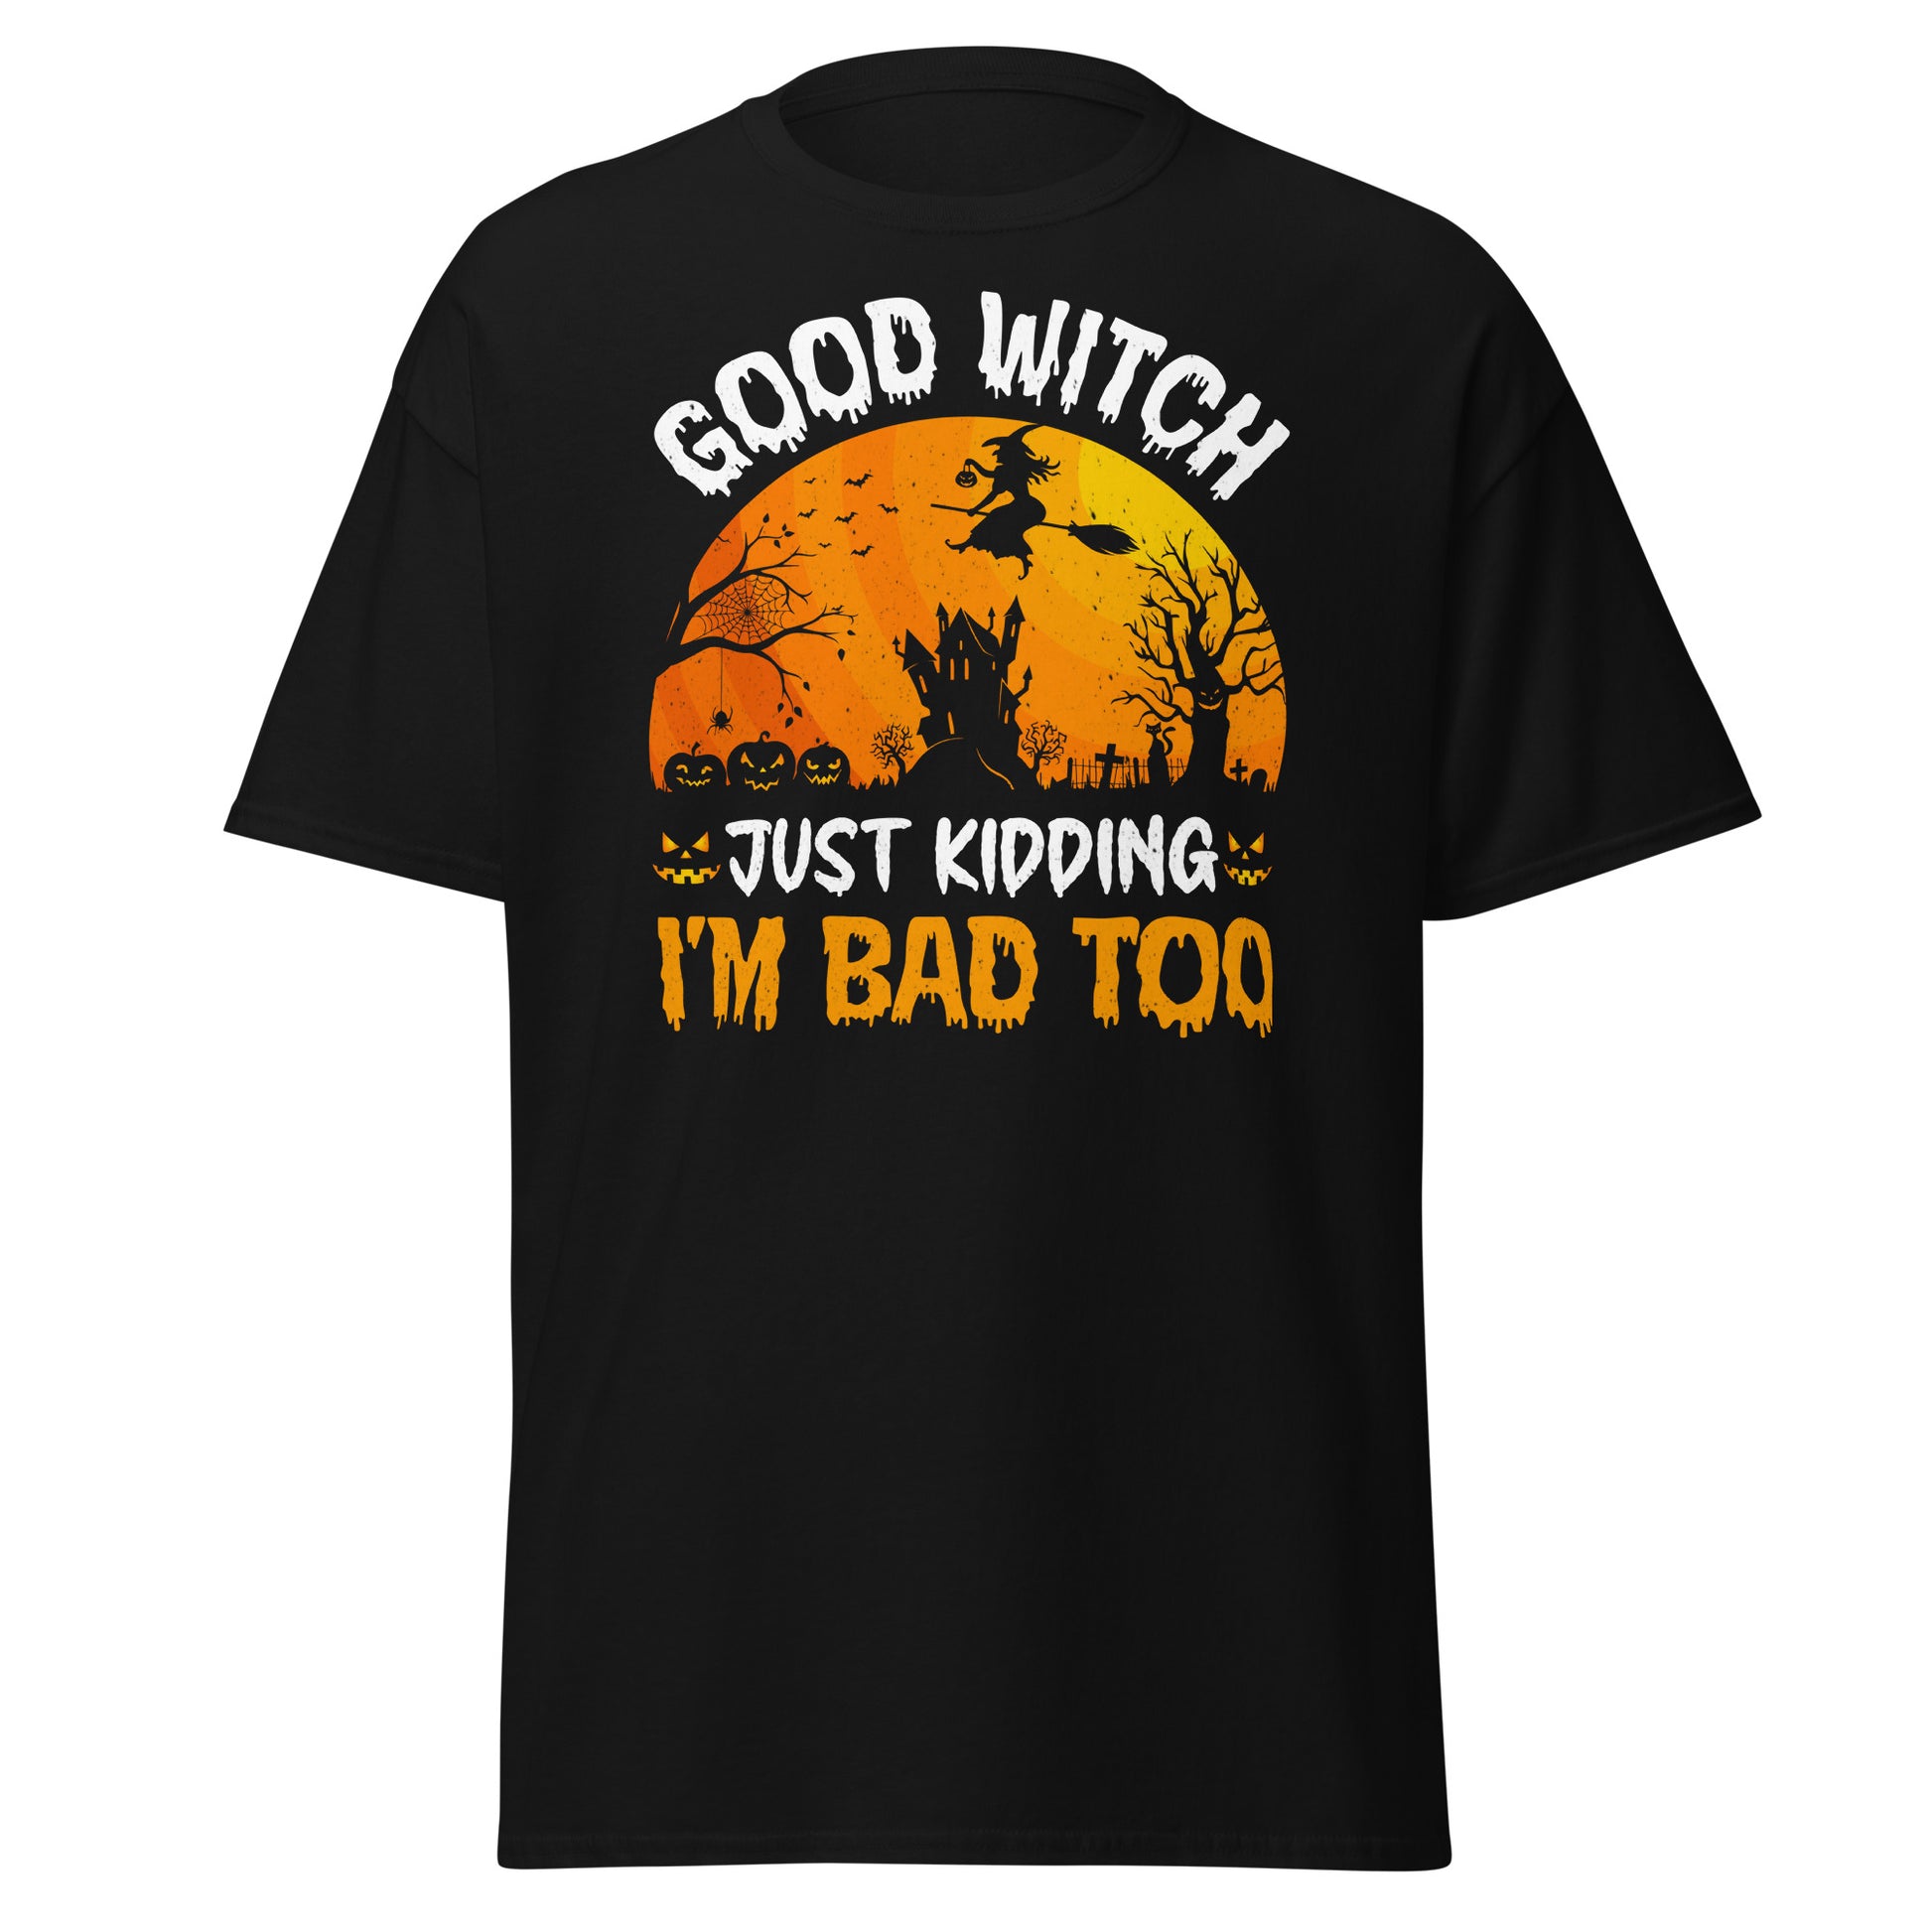 Good Witch, Just Kidding I'm Bad Too, Wickedly Good & Bad: Halloween Tee